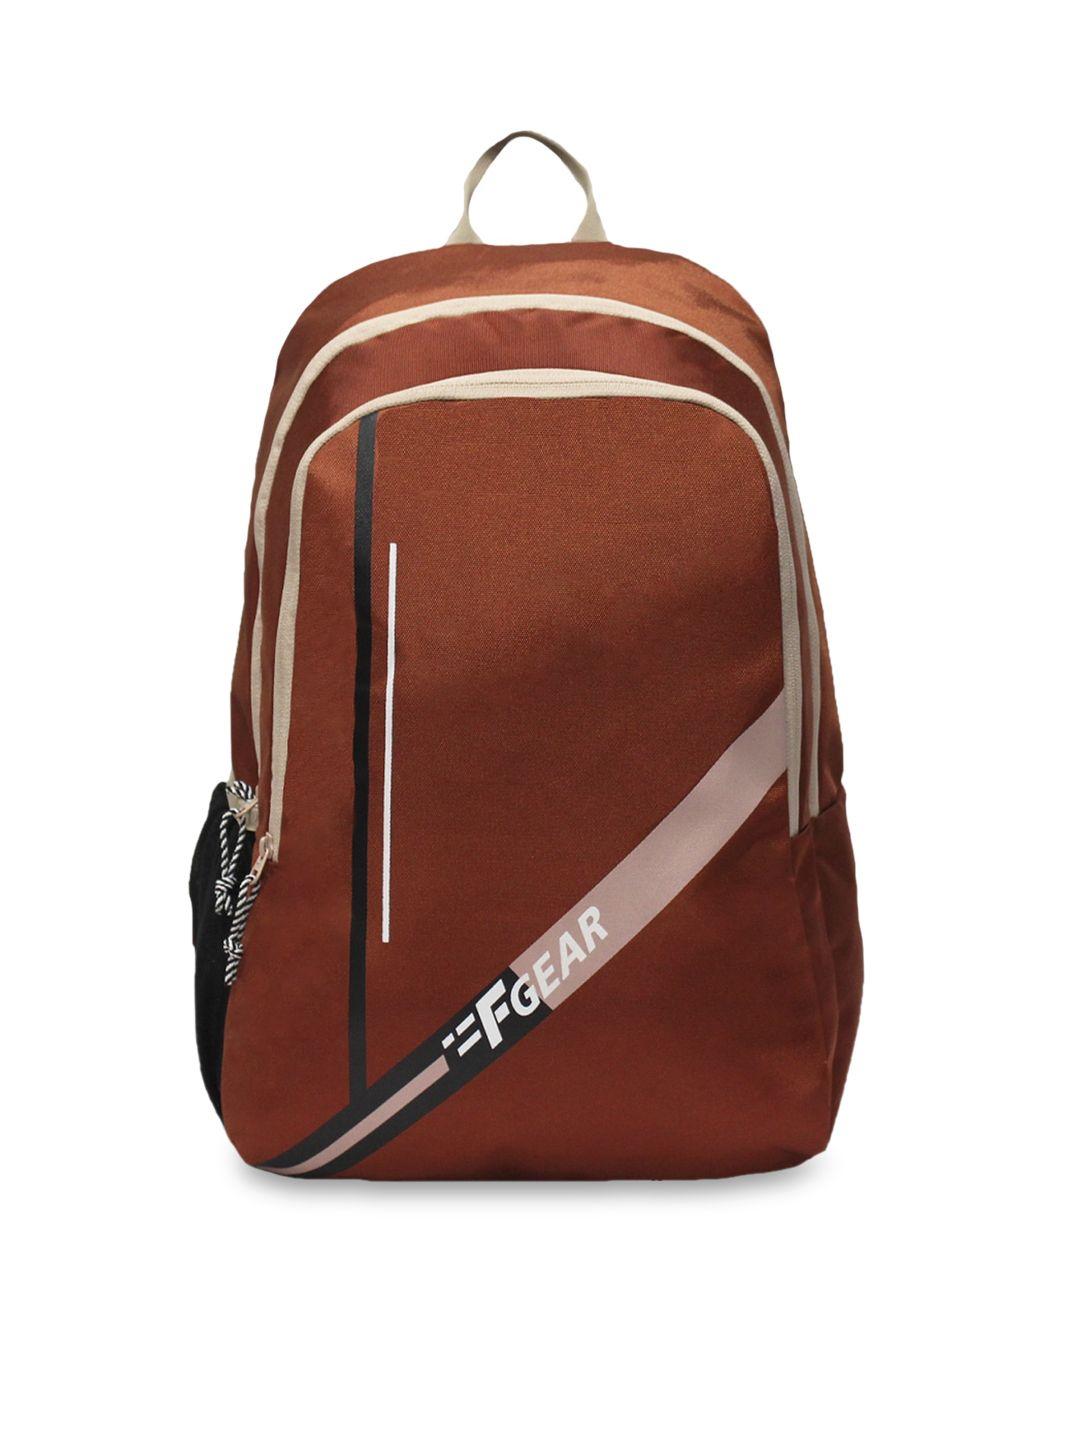 f gear unisex rust brown & peach-coloured brand logo contrast detail backpack